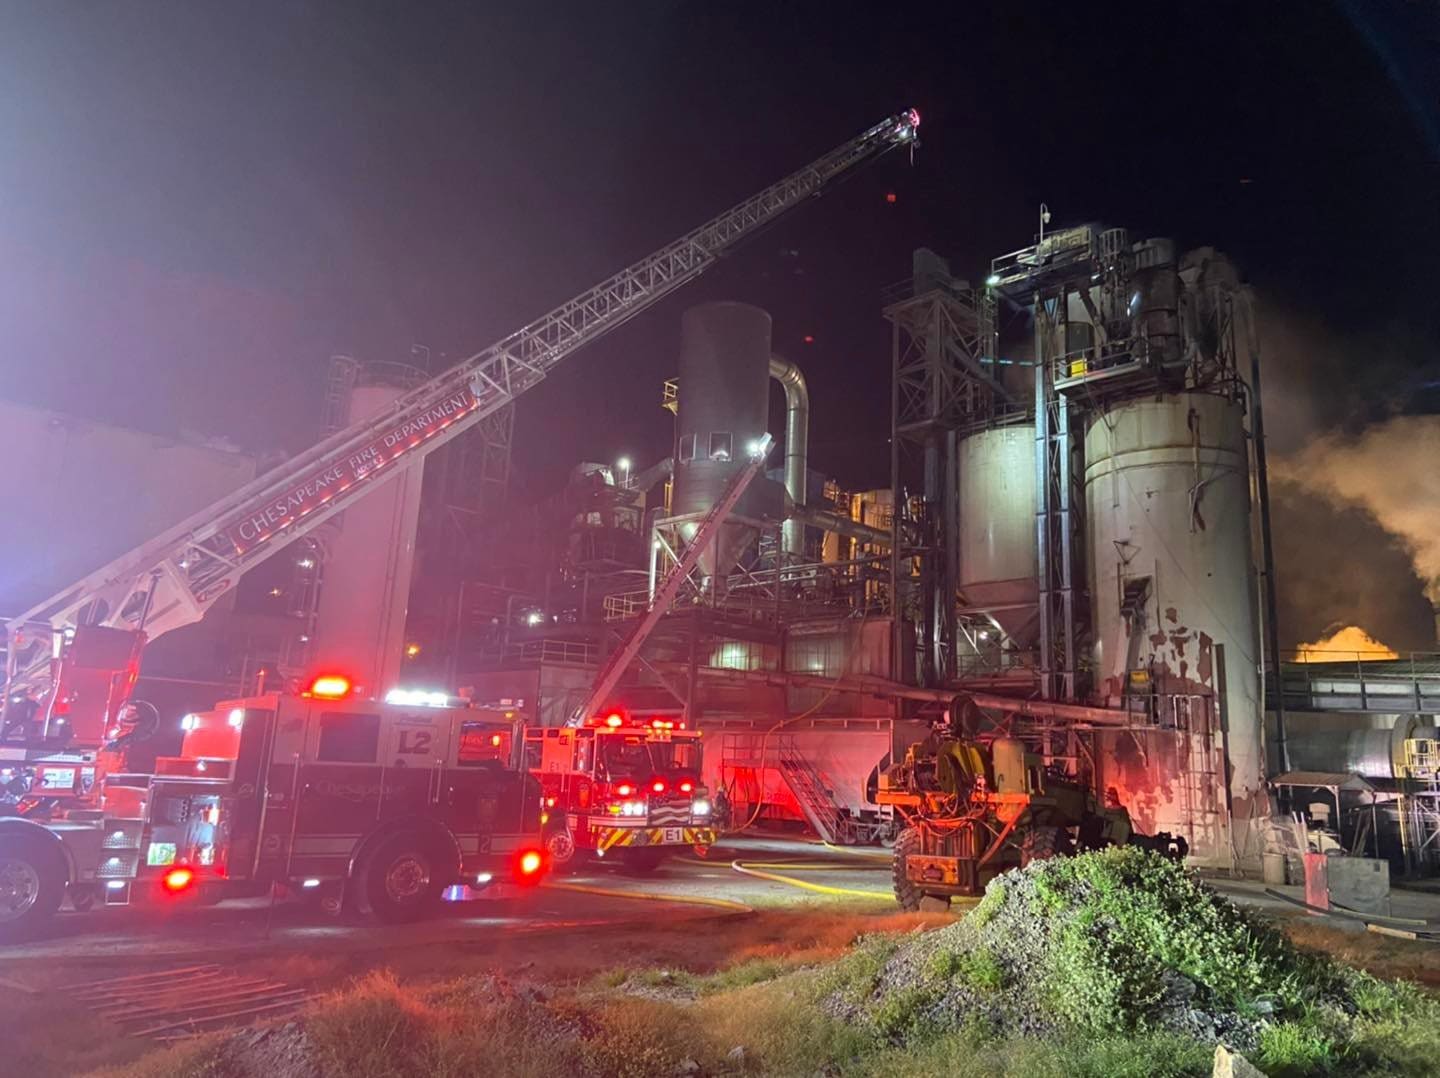 Firefighters extinguish industrial fire at Perdue Farms facility